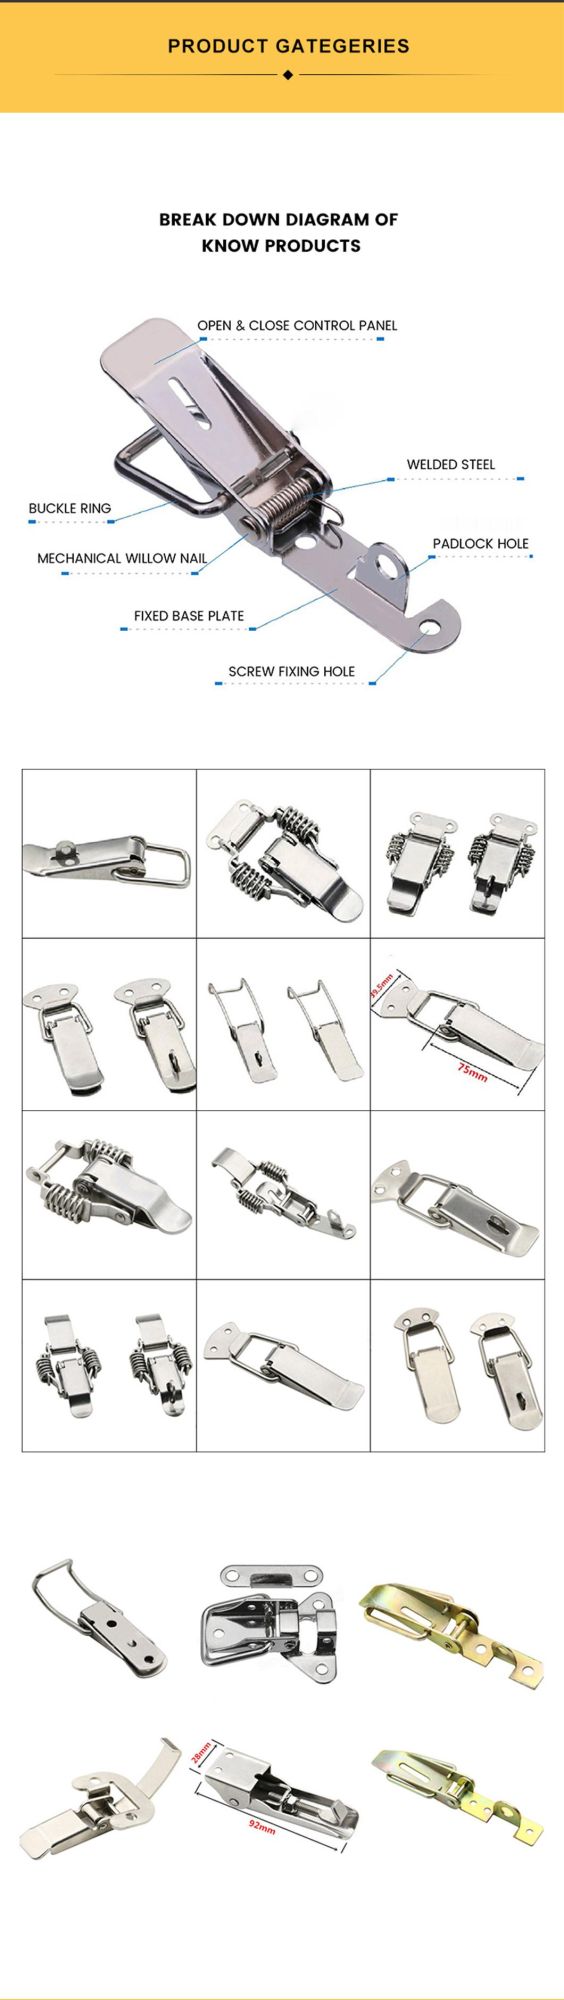 Flush Toggle Latch 304 Stainless Steel Concealed Toggle Latch Safety Catch Key Locking Versa Draw Latch